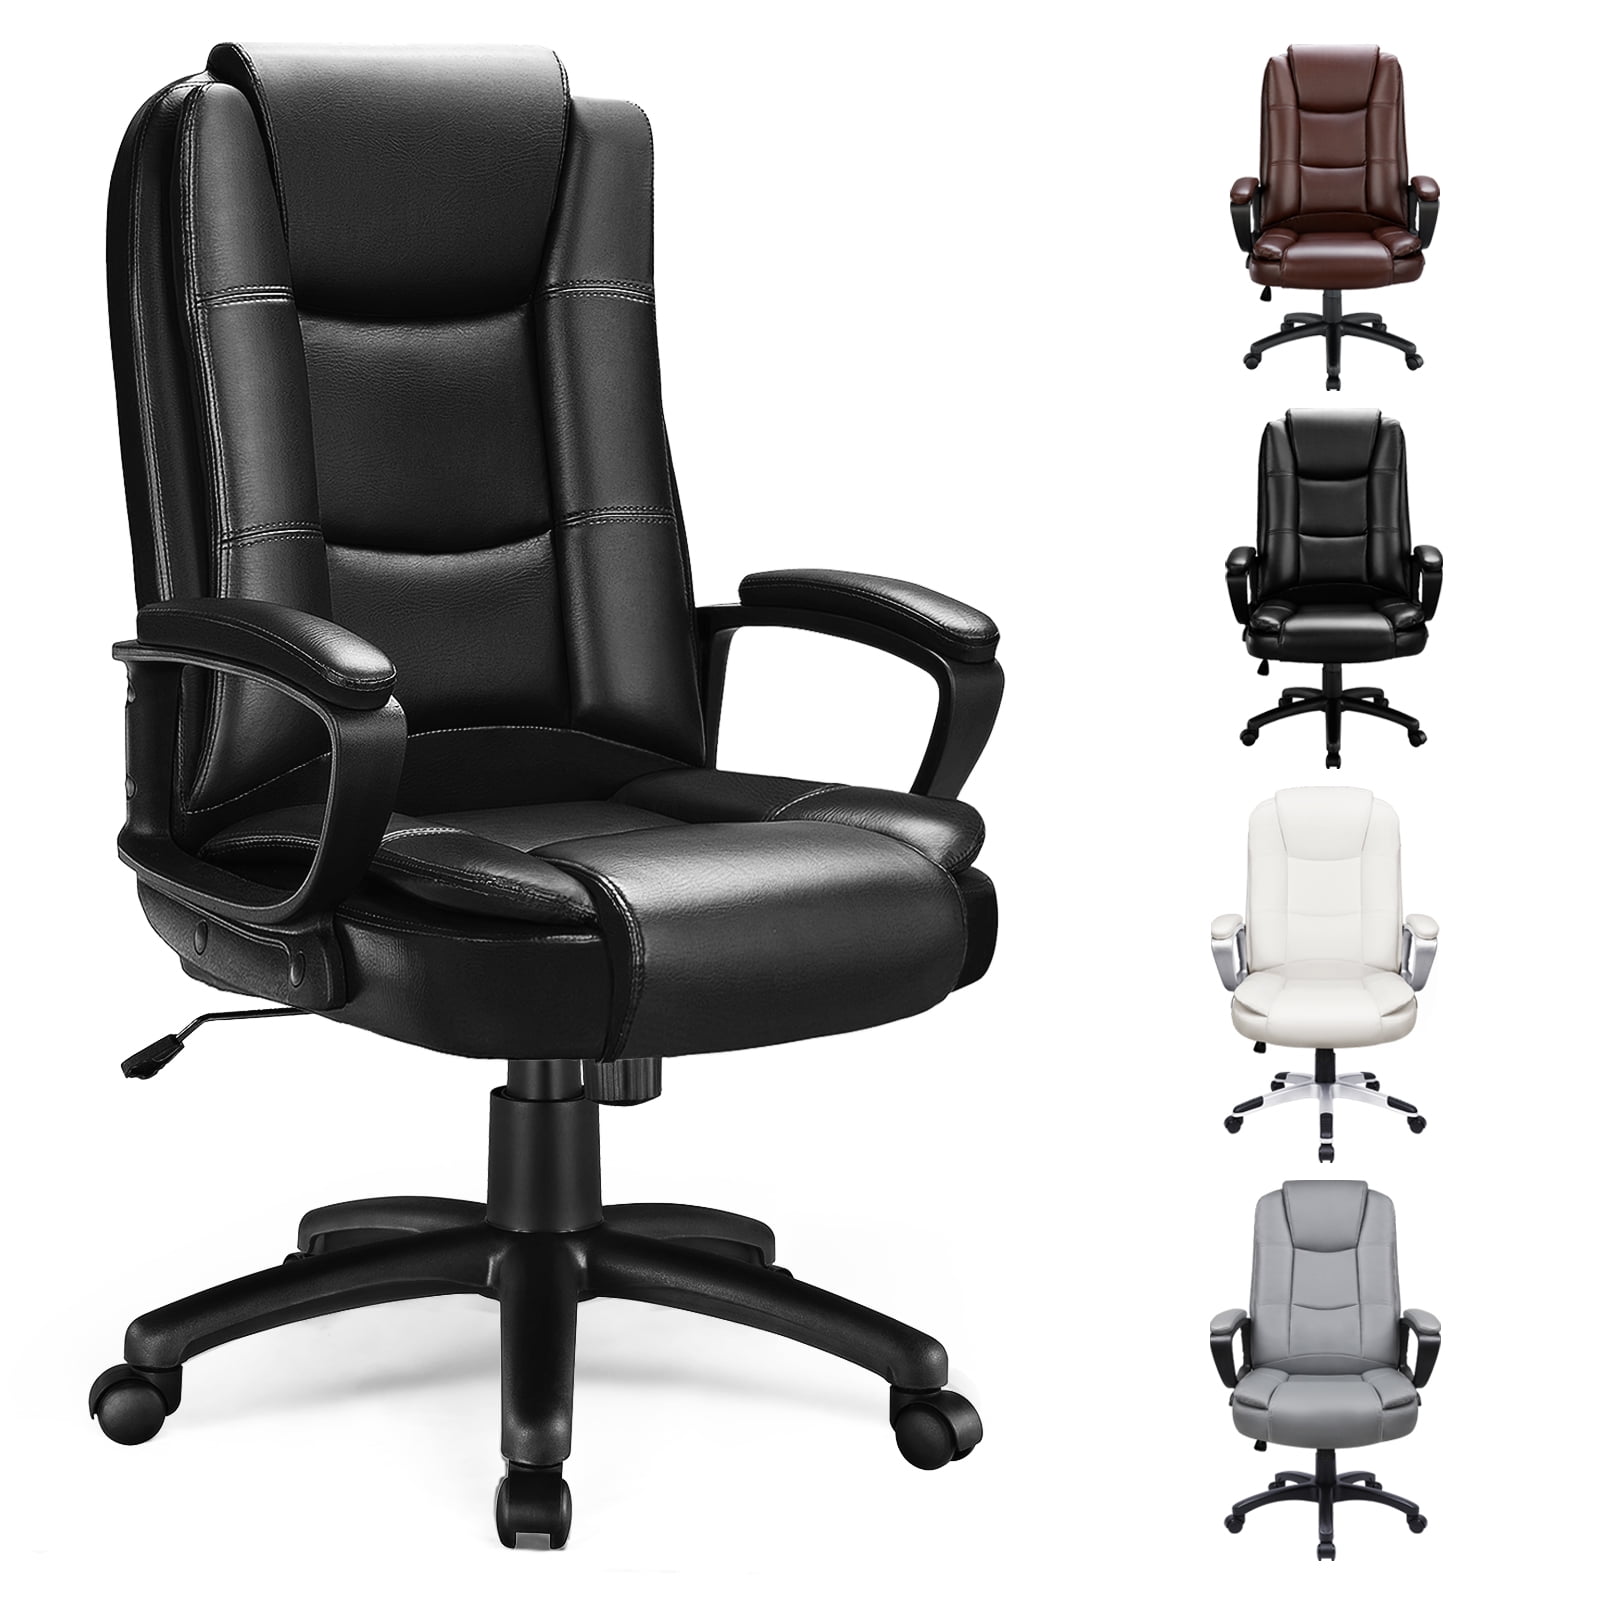 Waleaf Home Office Chair, Big and Tall Desk Chair 8Hours Heavy Duty Design, Ergonomic High Back Cushion Lumbar Back Support, Computer Desk Chair, Adjustable Executive Leather Chair with Arms - image 4 of 8